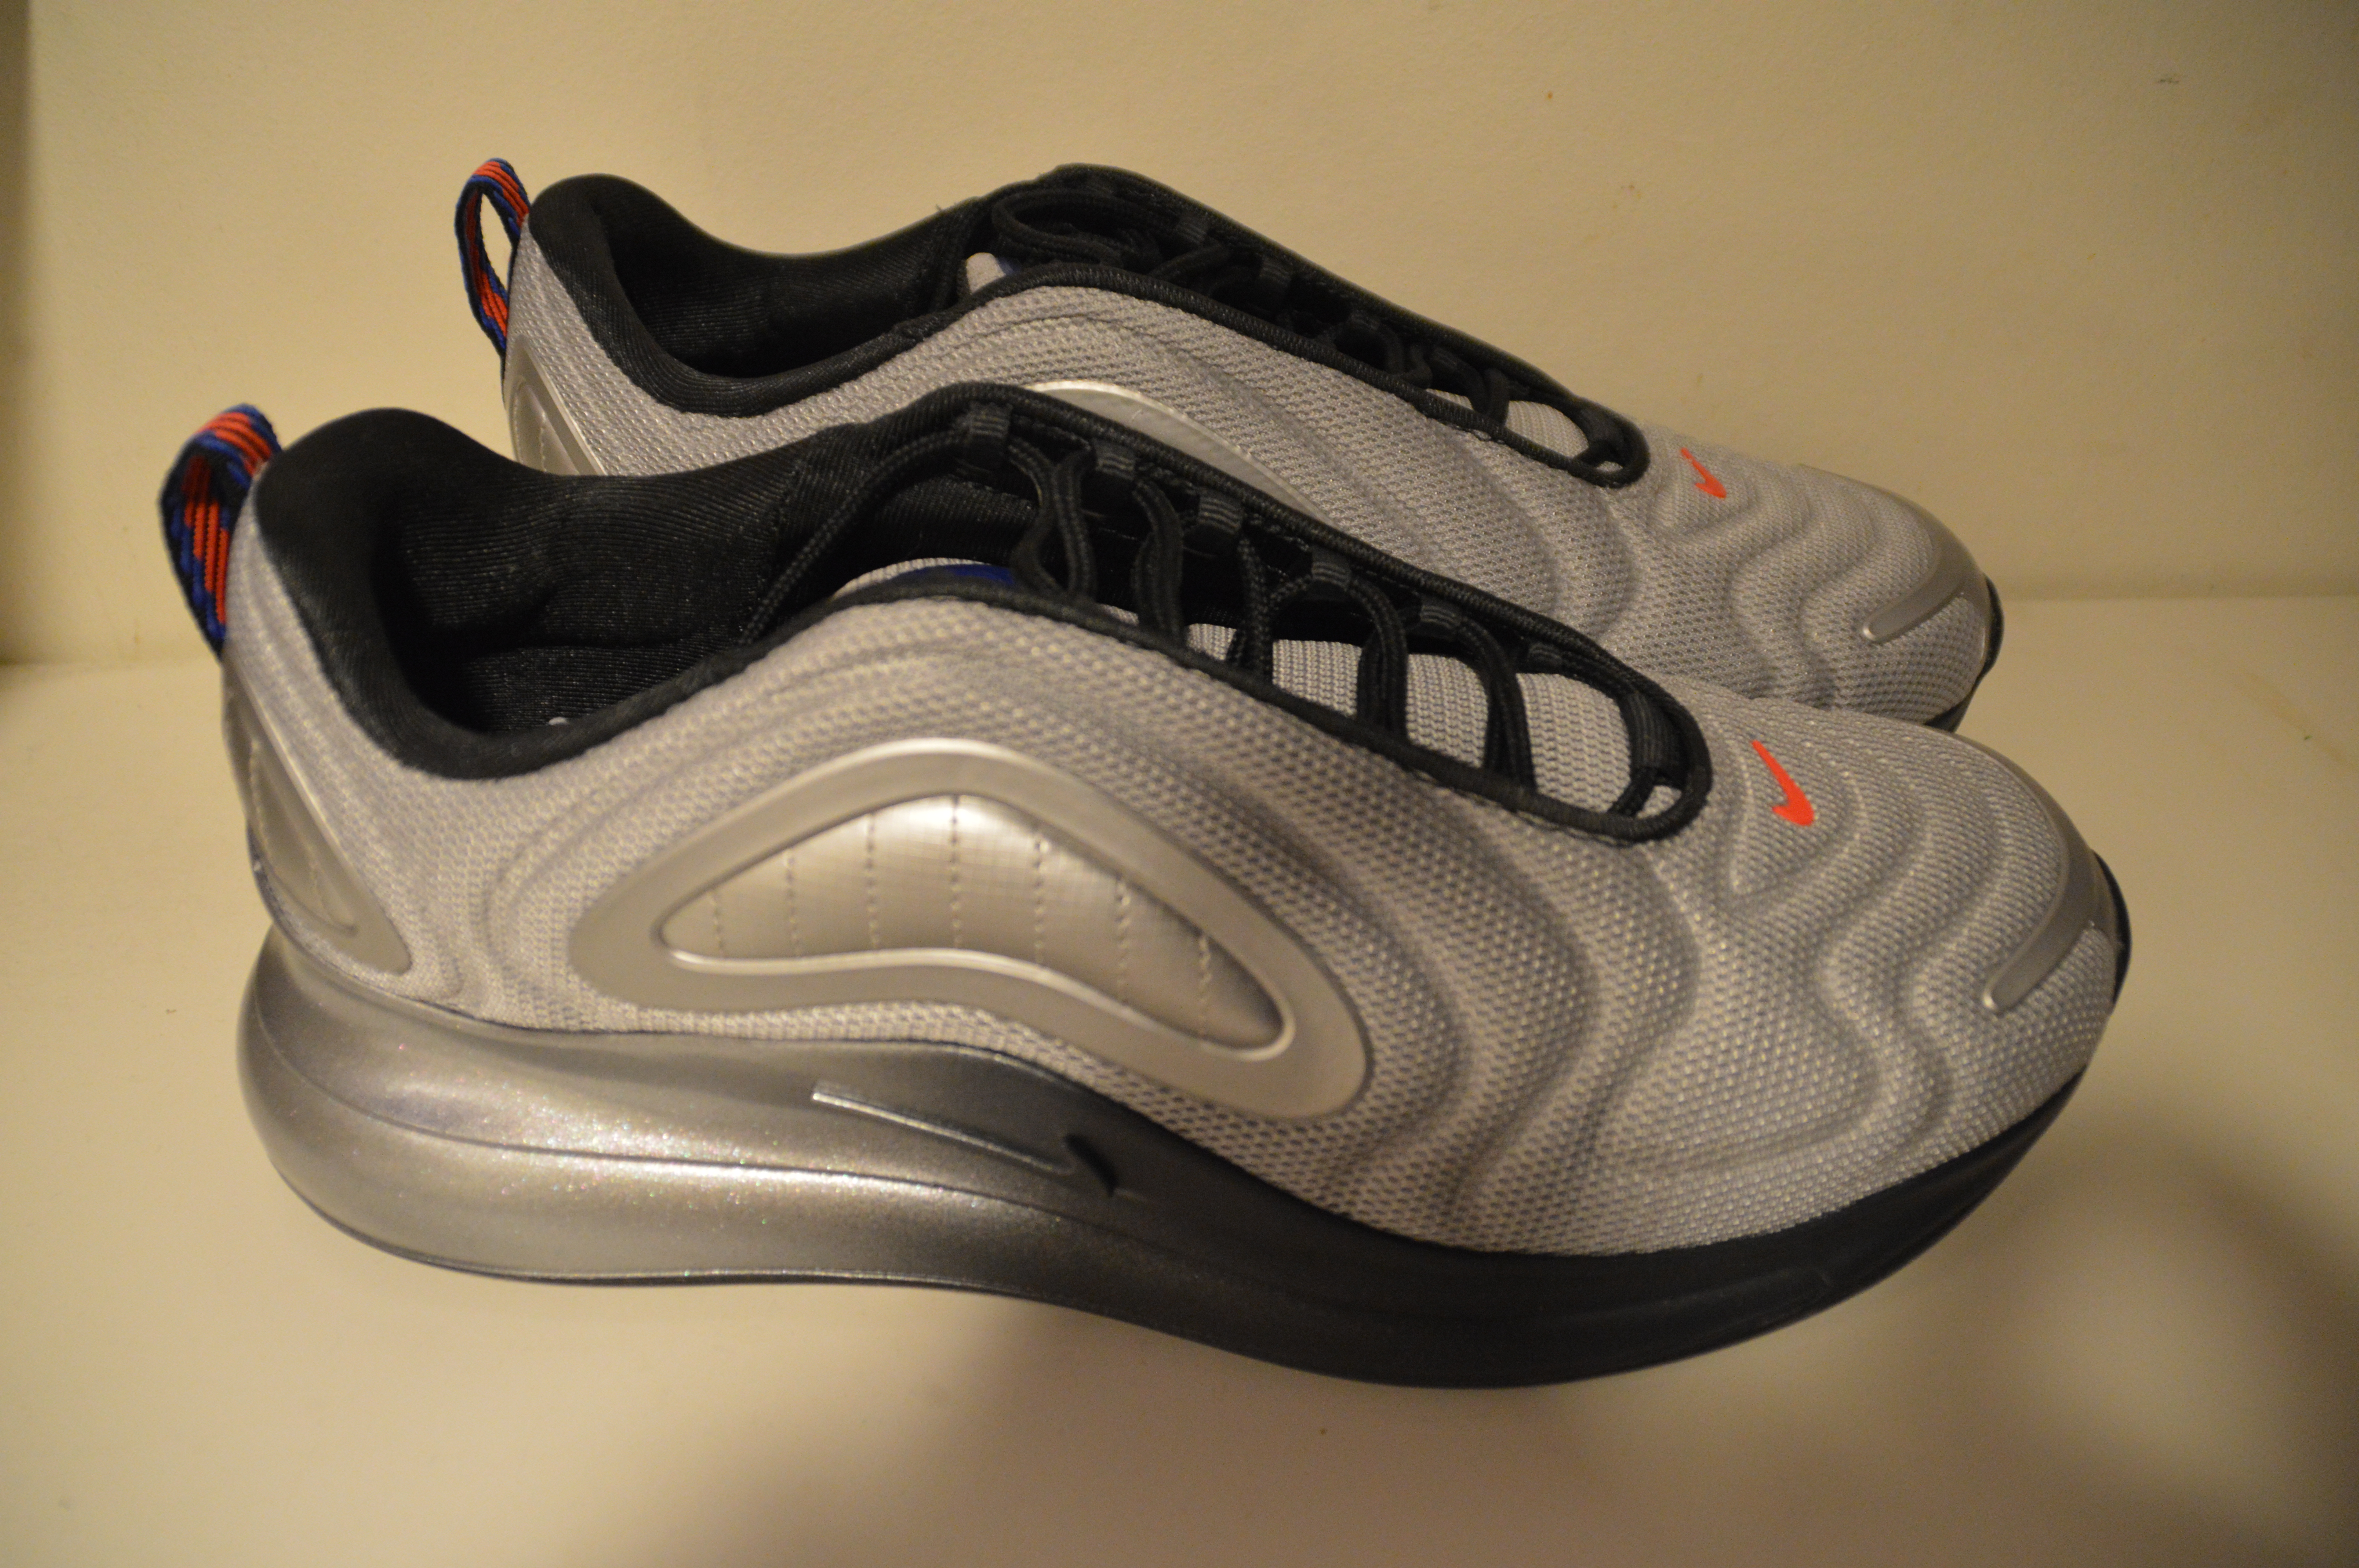 File:A pair of Nike Air Max 720.jpg - Wikimedia Commons